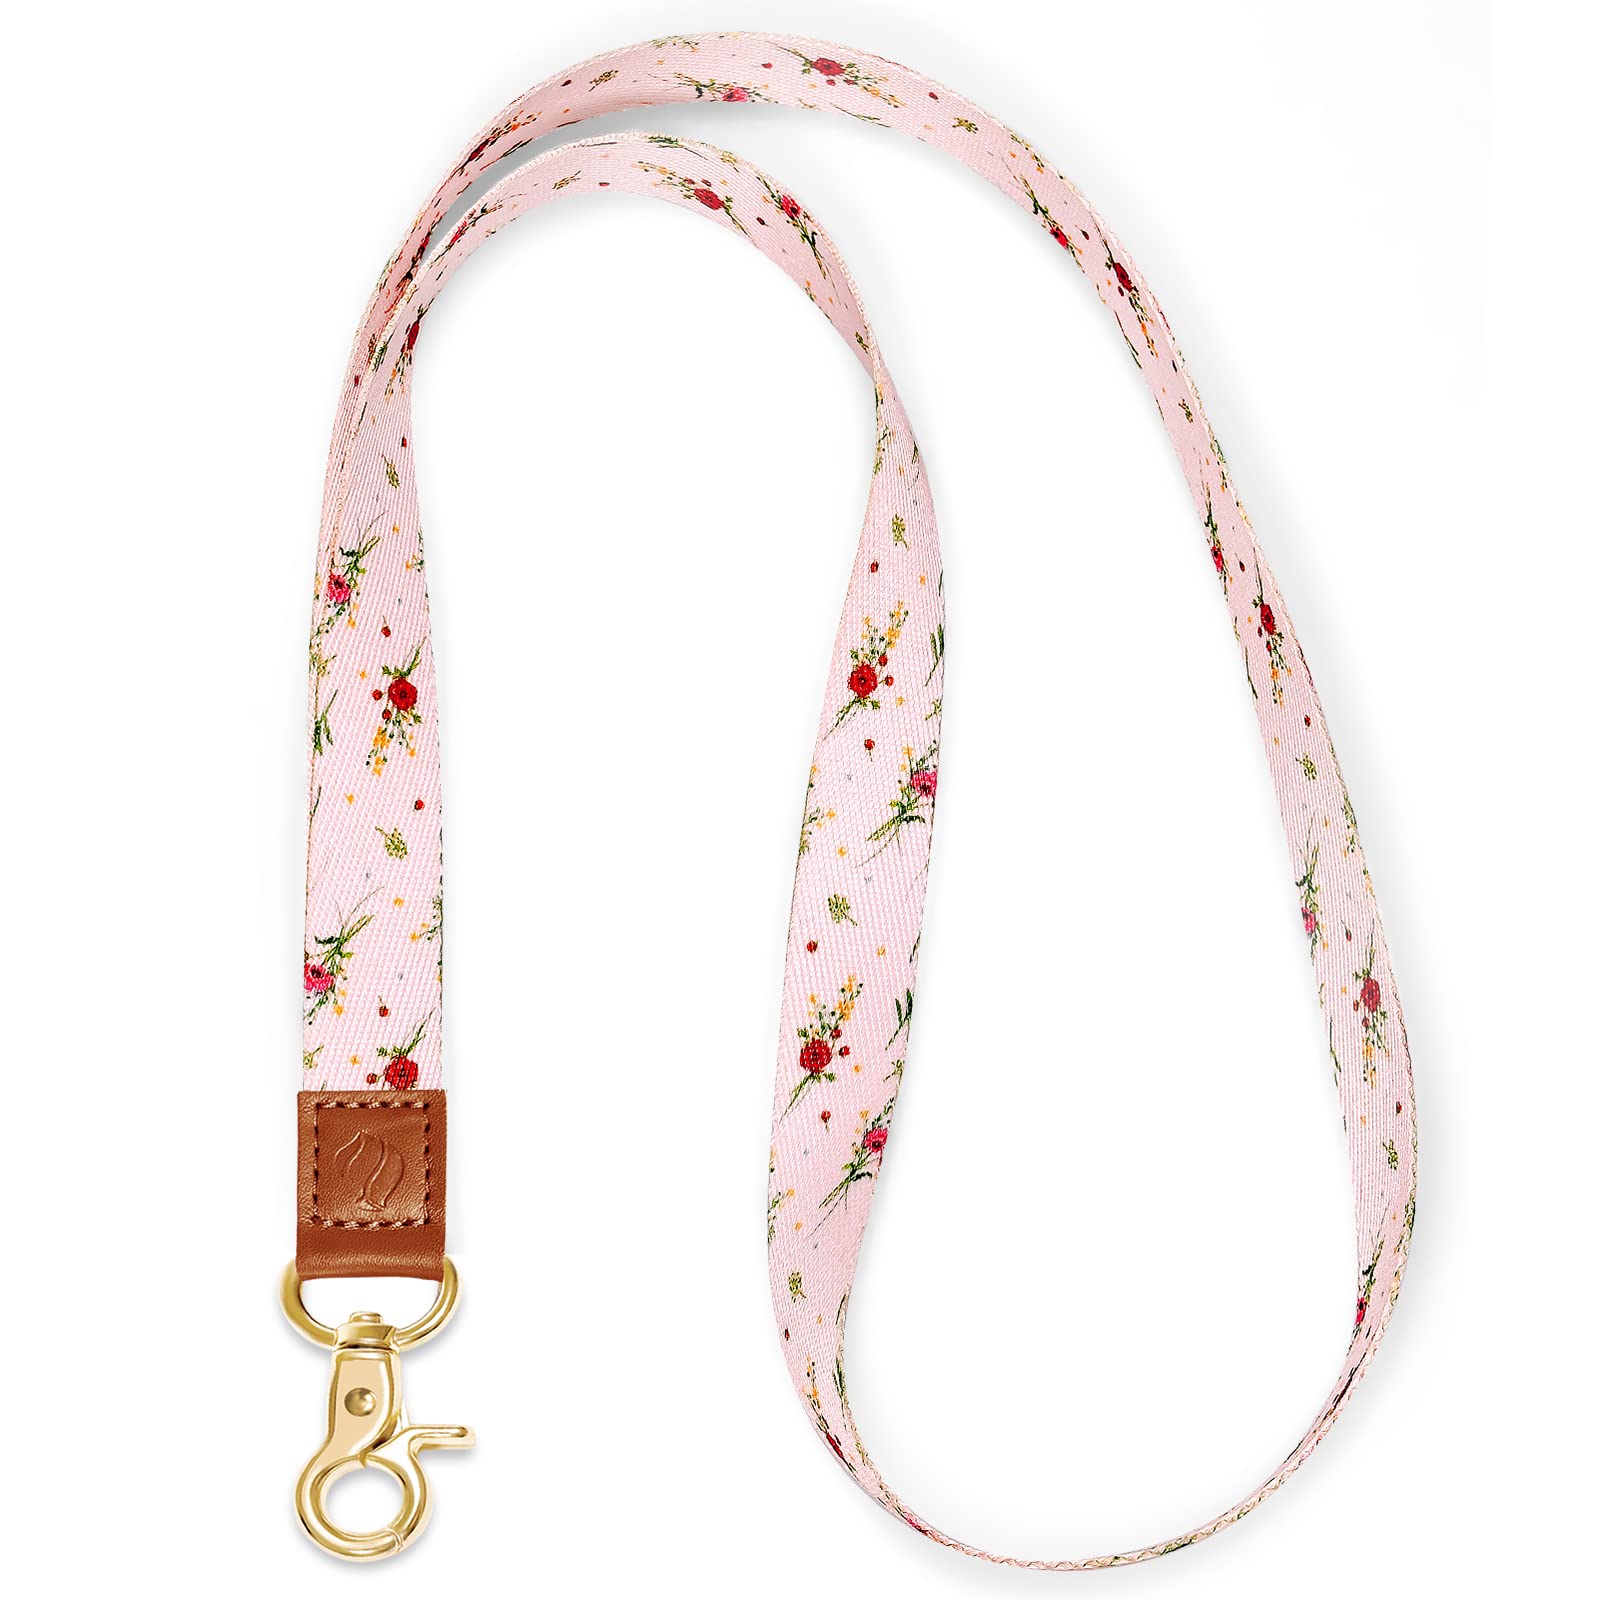 Rose Lake Neck Lanyard Keychain for Women and Men, Cute Neck Strap Lanyard for Keys, ID Badges Holder, Wallets (Small Flowers)